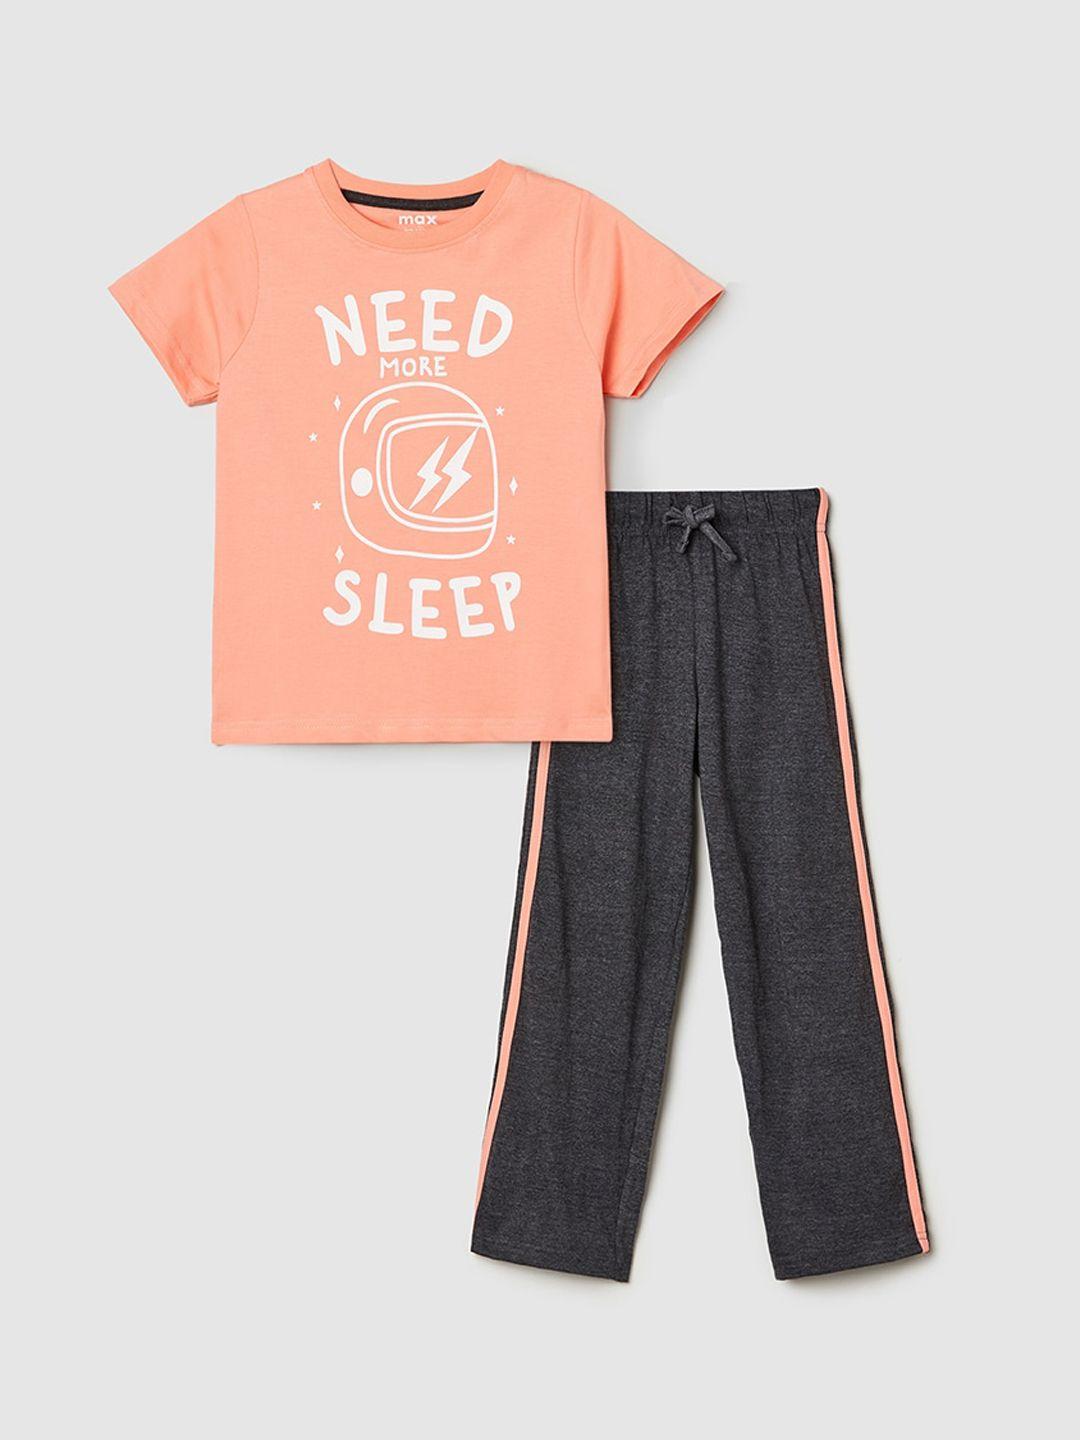 max boys peach & charcoal-colored printed cotton night suit